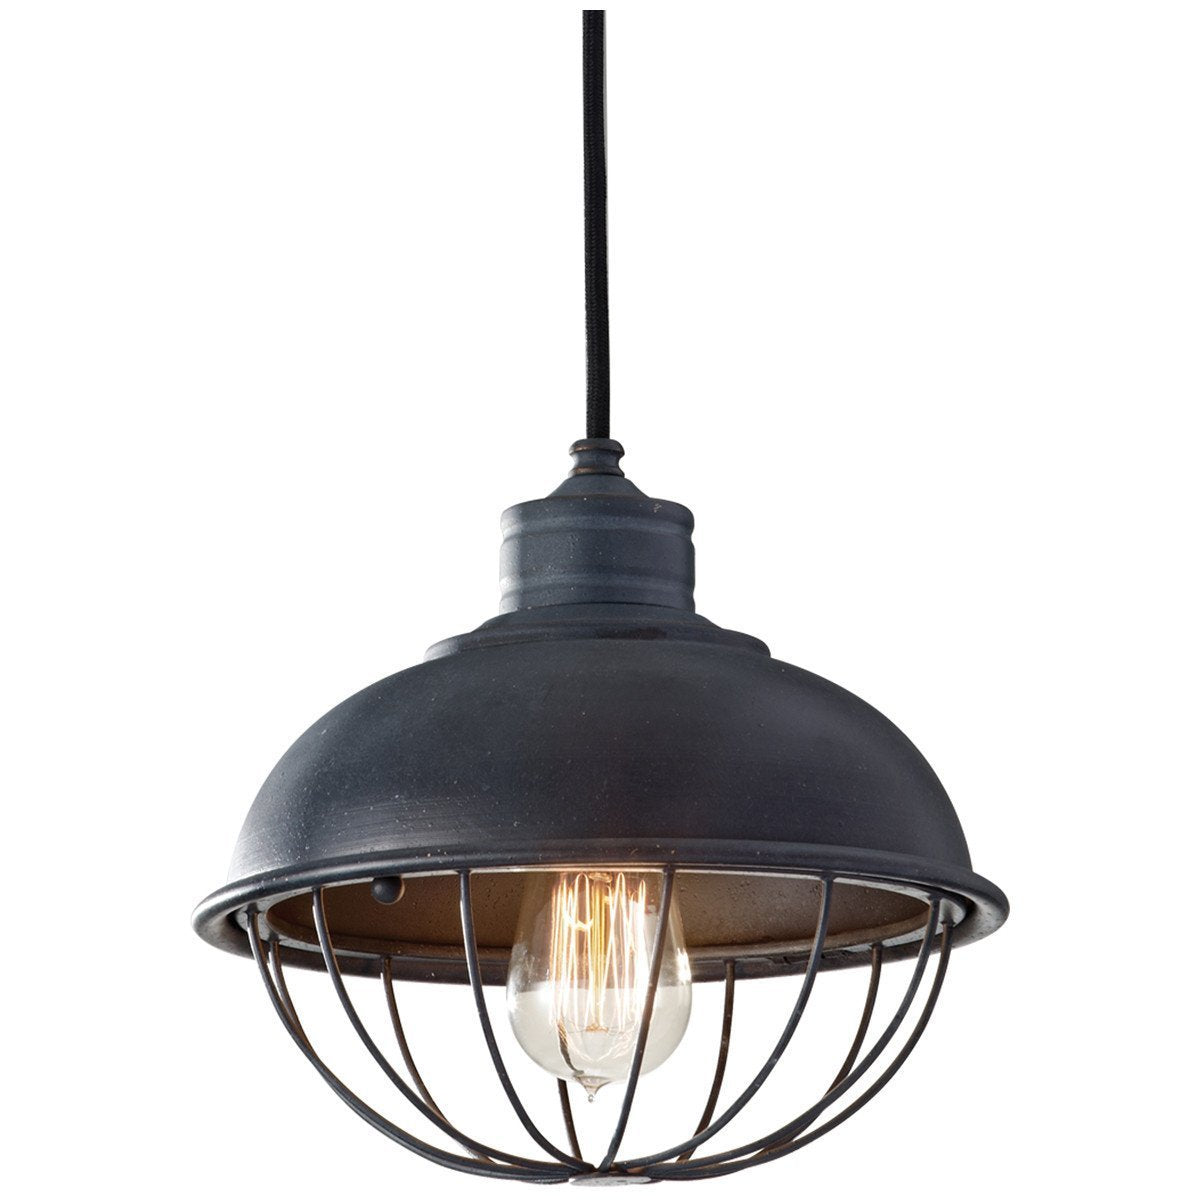 Feiss Urban Renewal 1 Light Antique Forged Iron Pendant